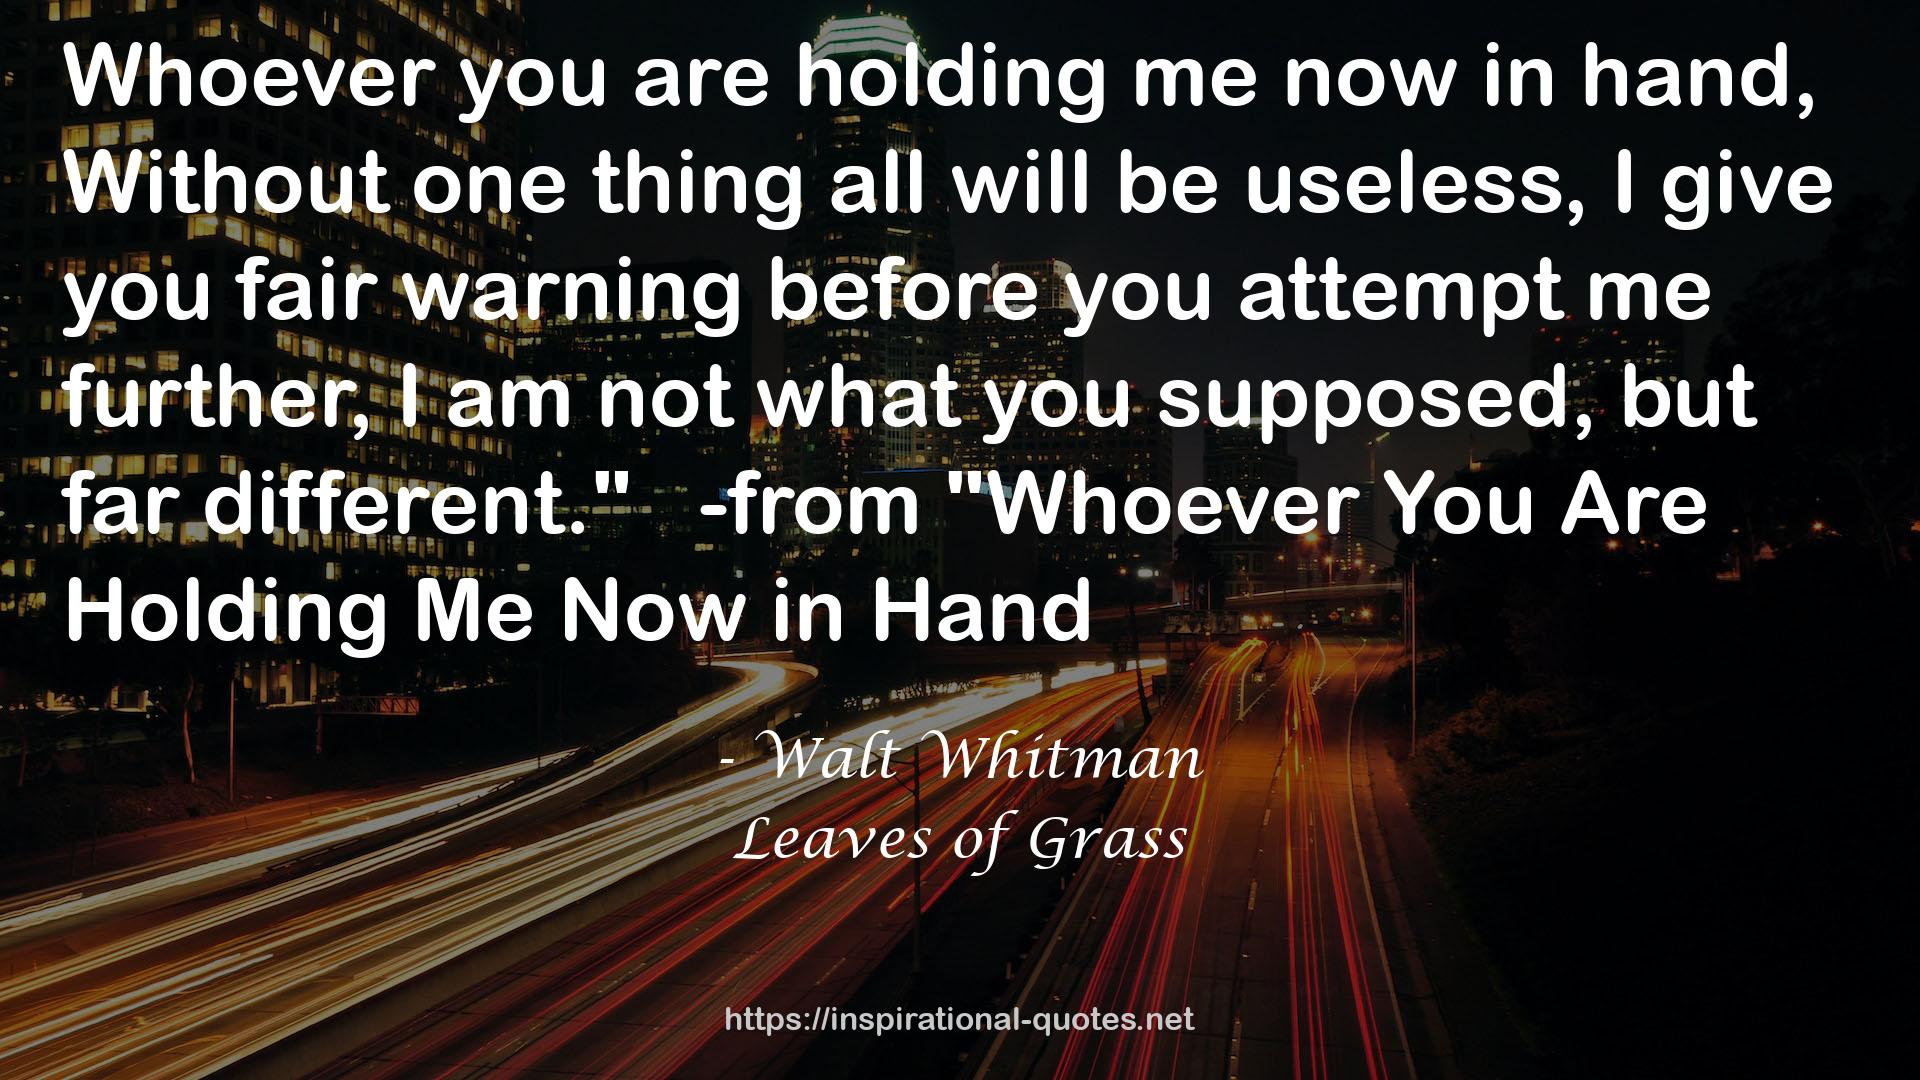 Leaves of Grass QUOTES